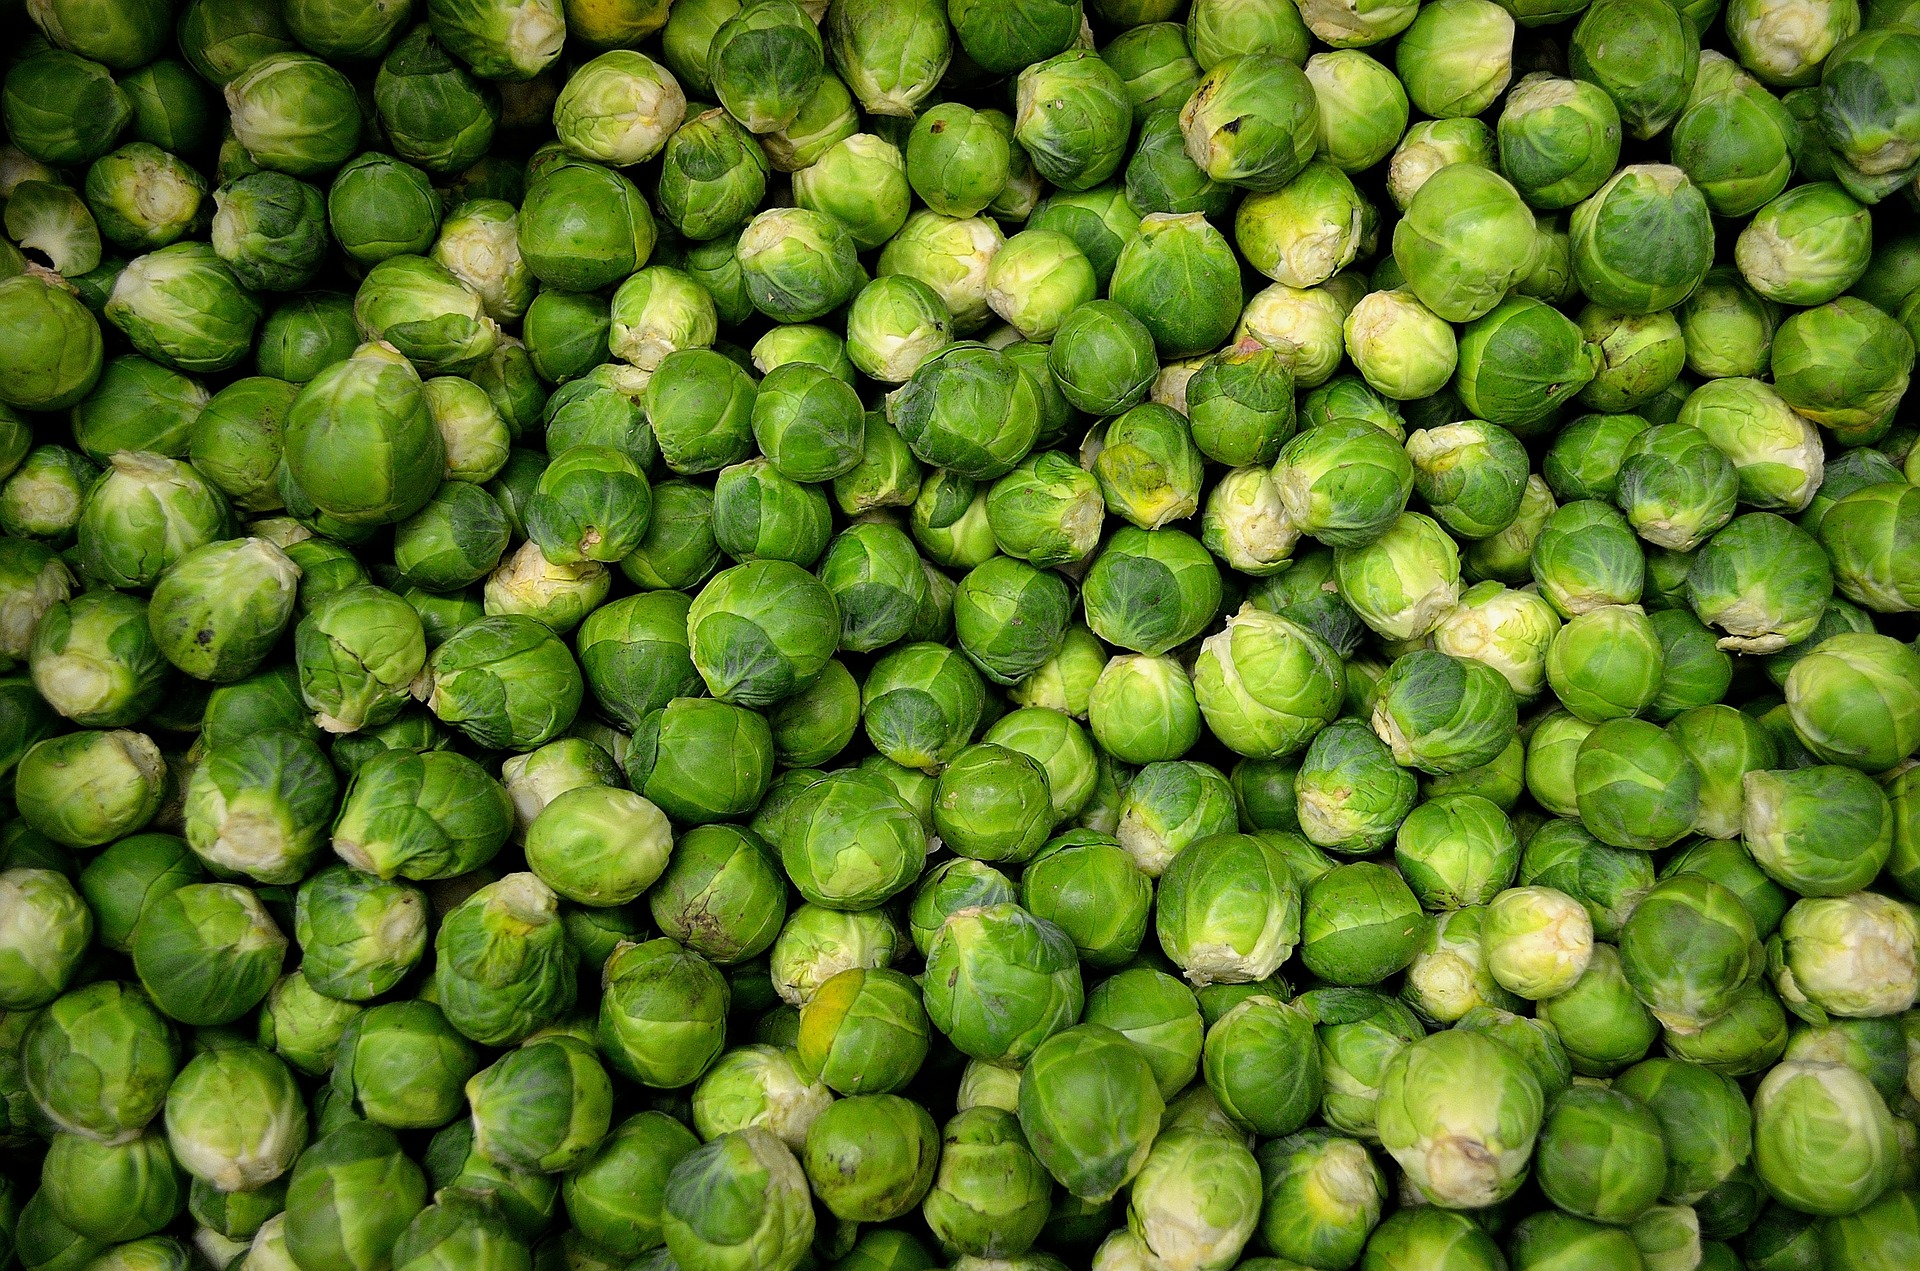 brussels-sprouts-22009_1920 (2)